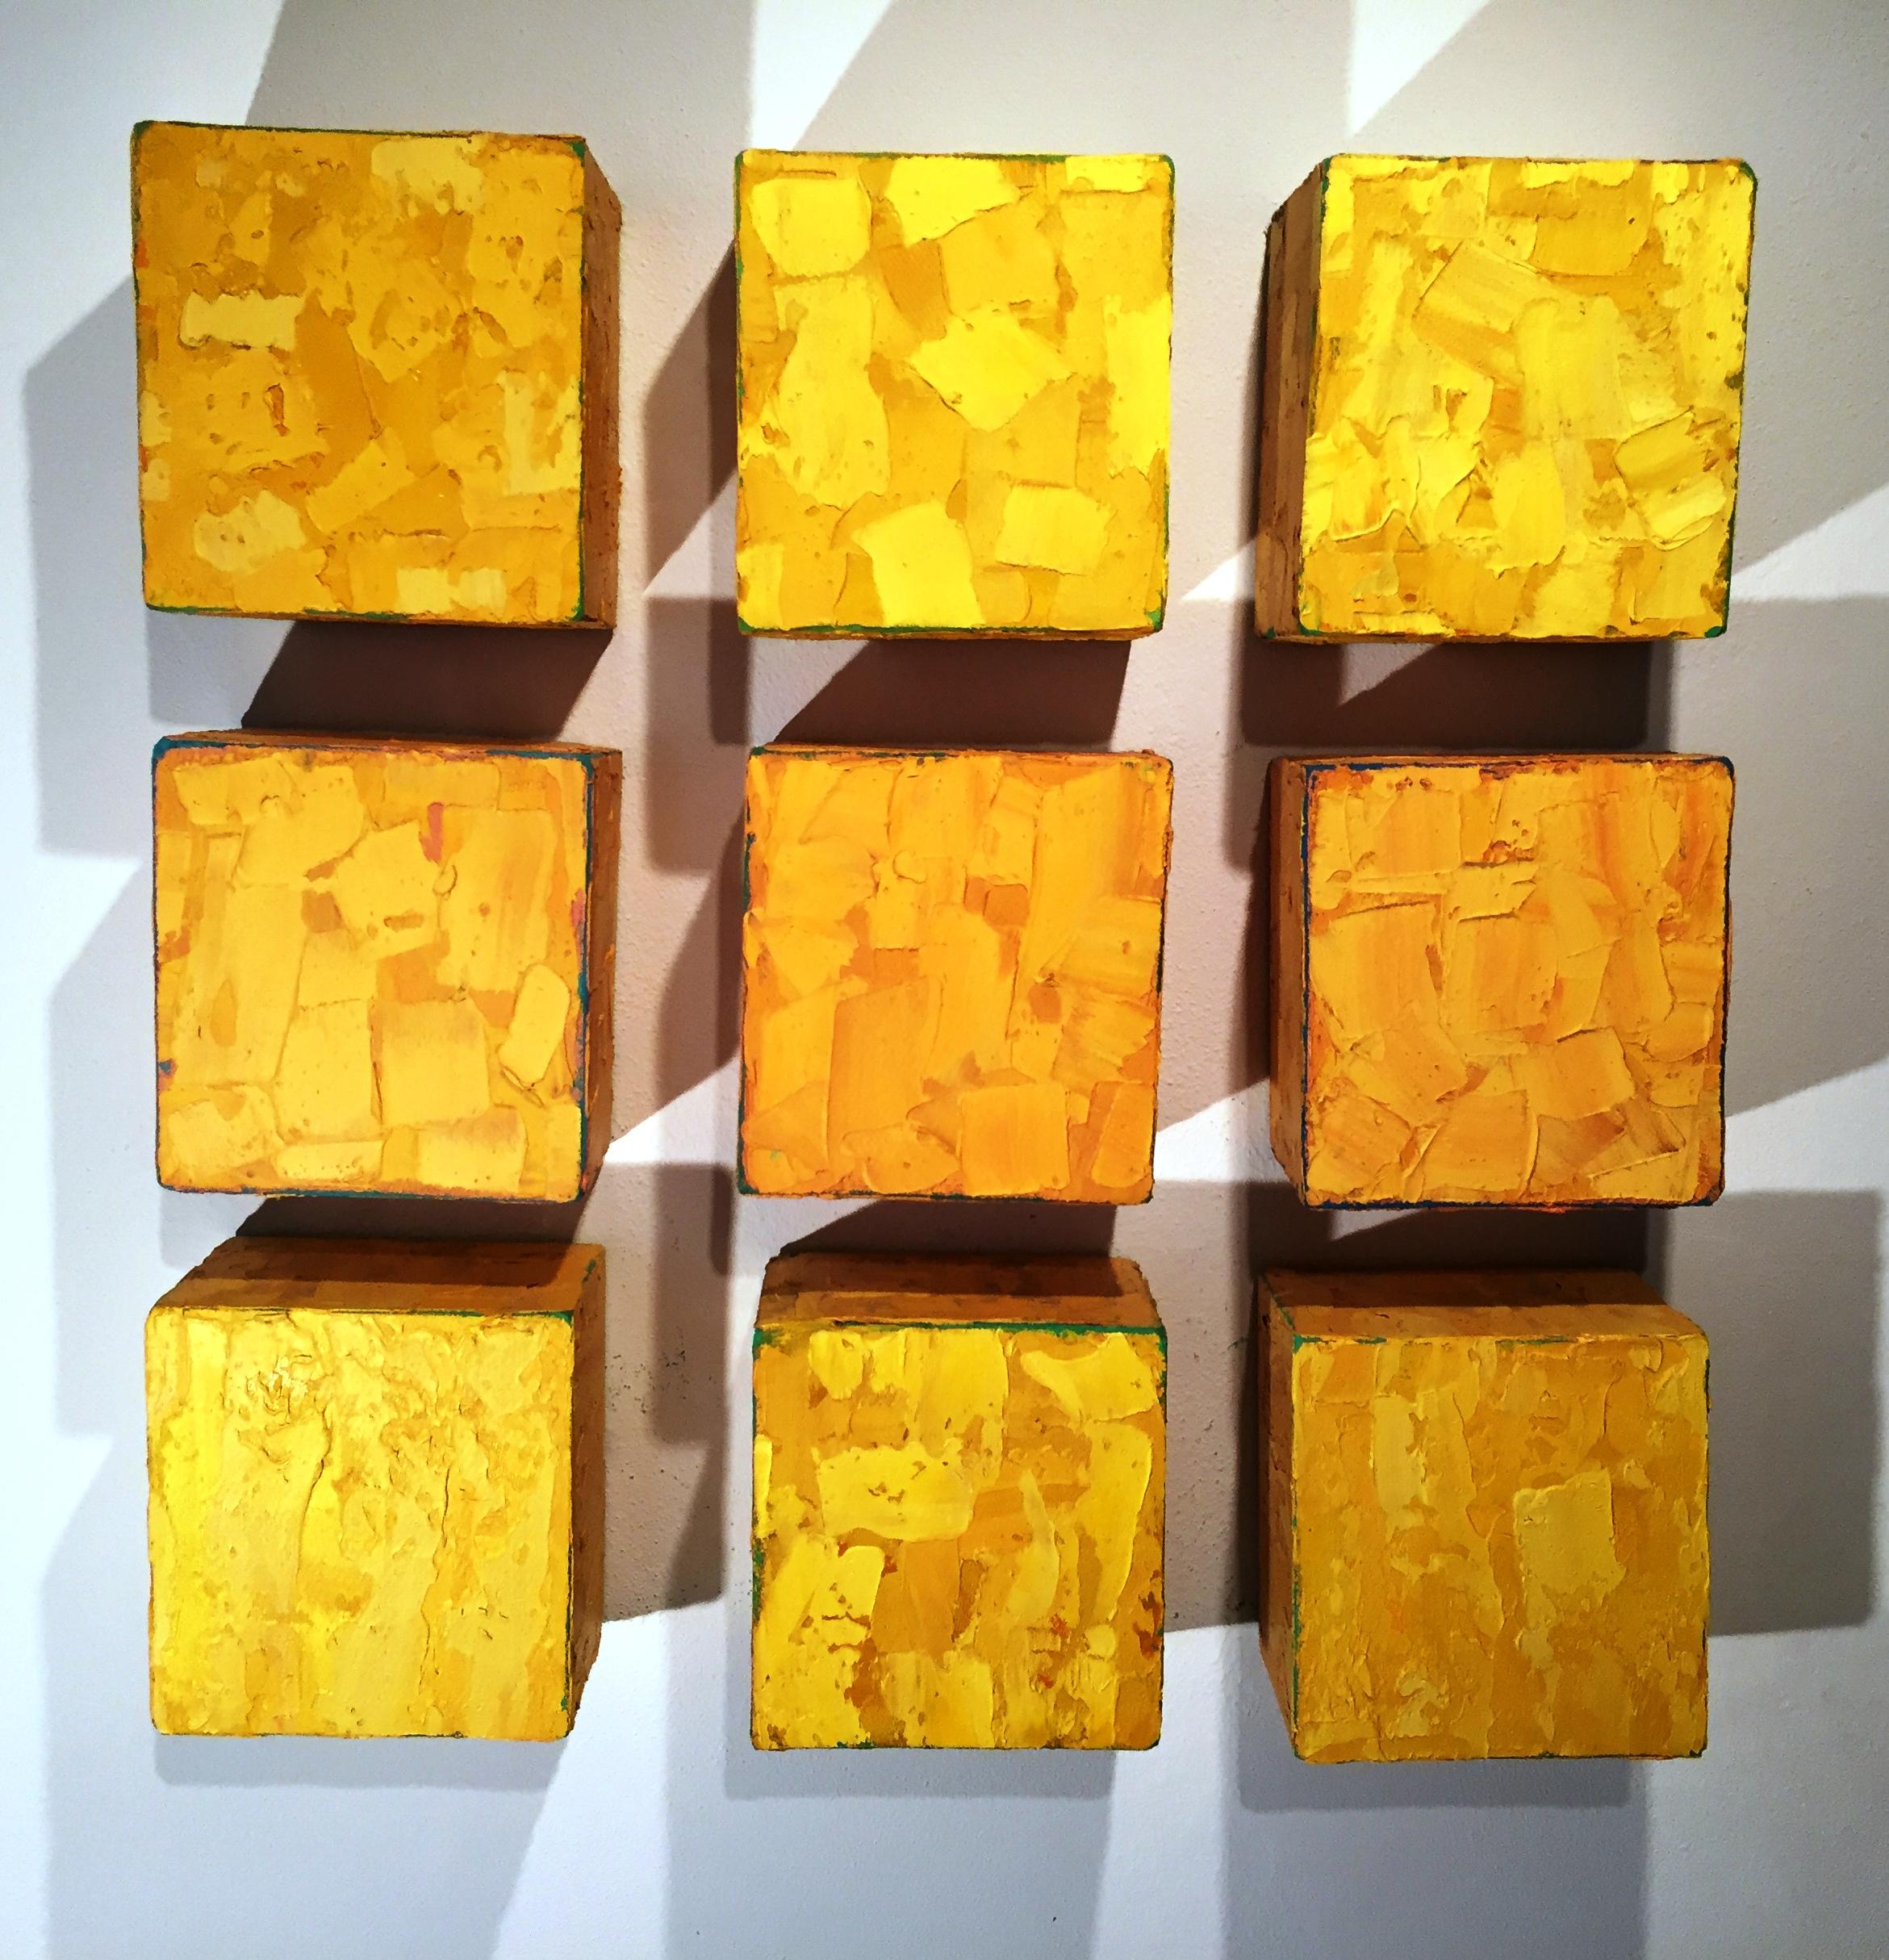 9 Boxes Installation Bright Yellow conceptual portrait of artist Clemens Briels - Abstract Painting by Rene Rietmeyer